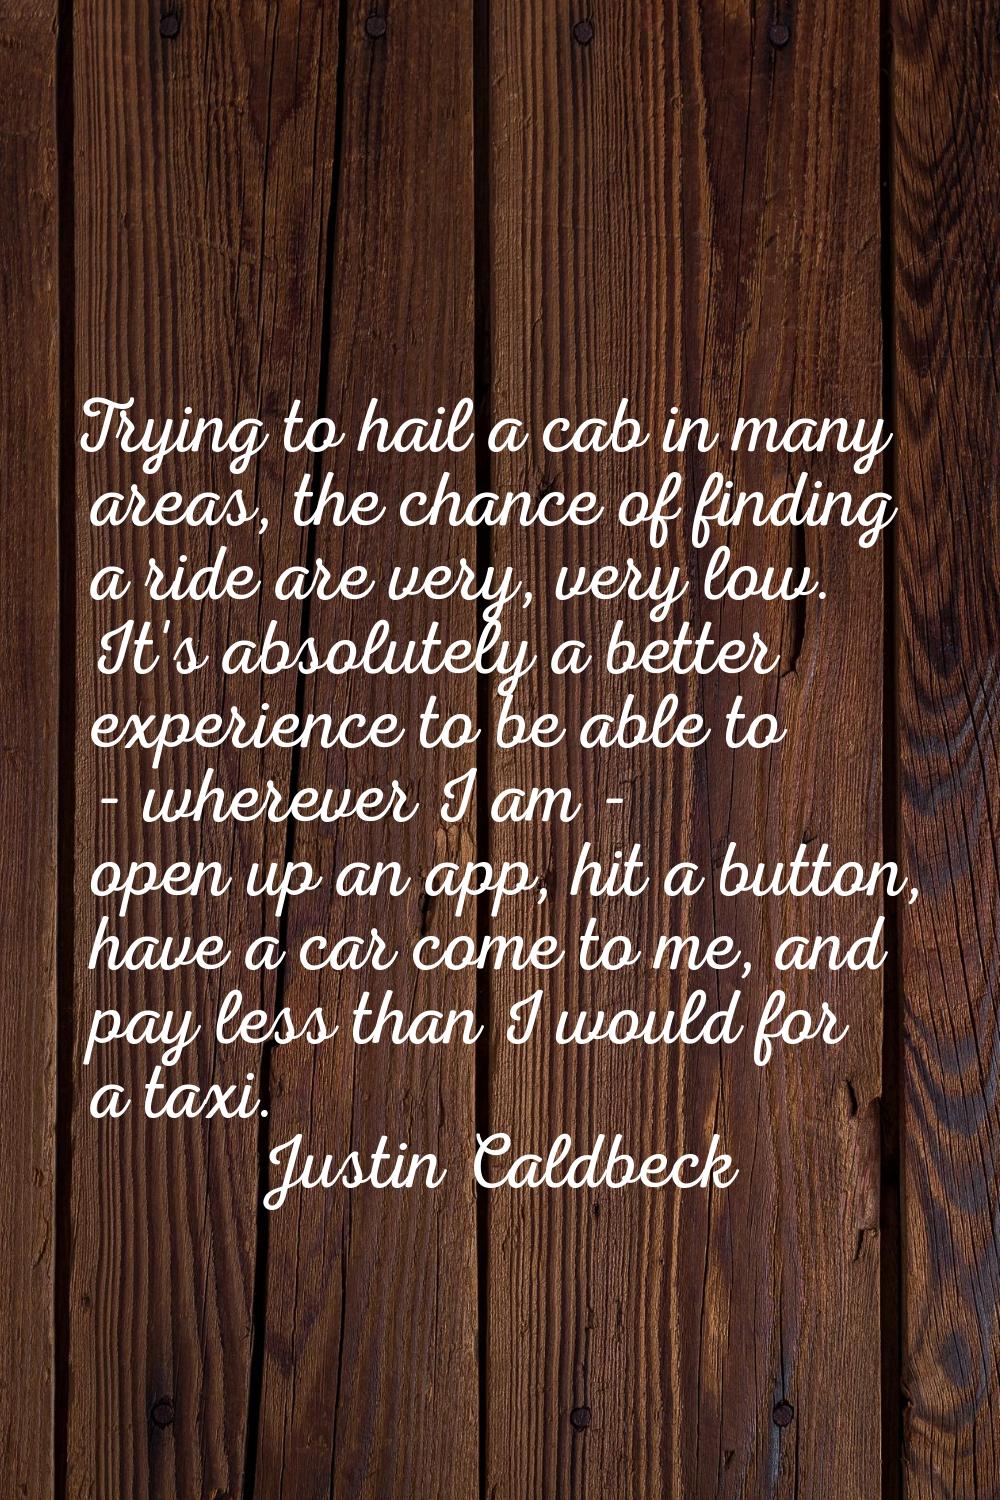 Trying to hail a cab in many areas, the chance of finding a ride are very, very low. It's absolutel